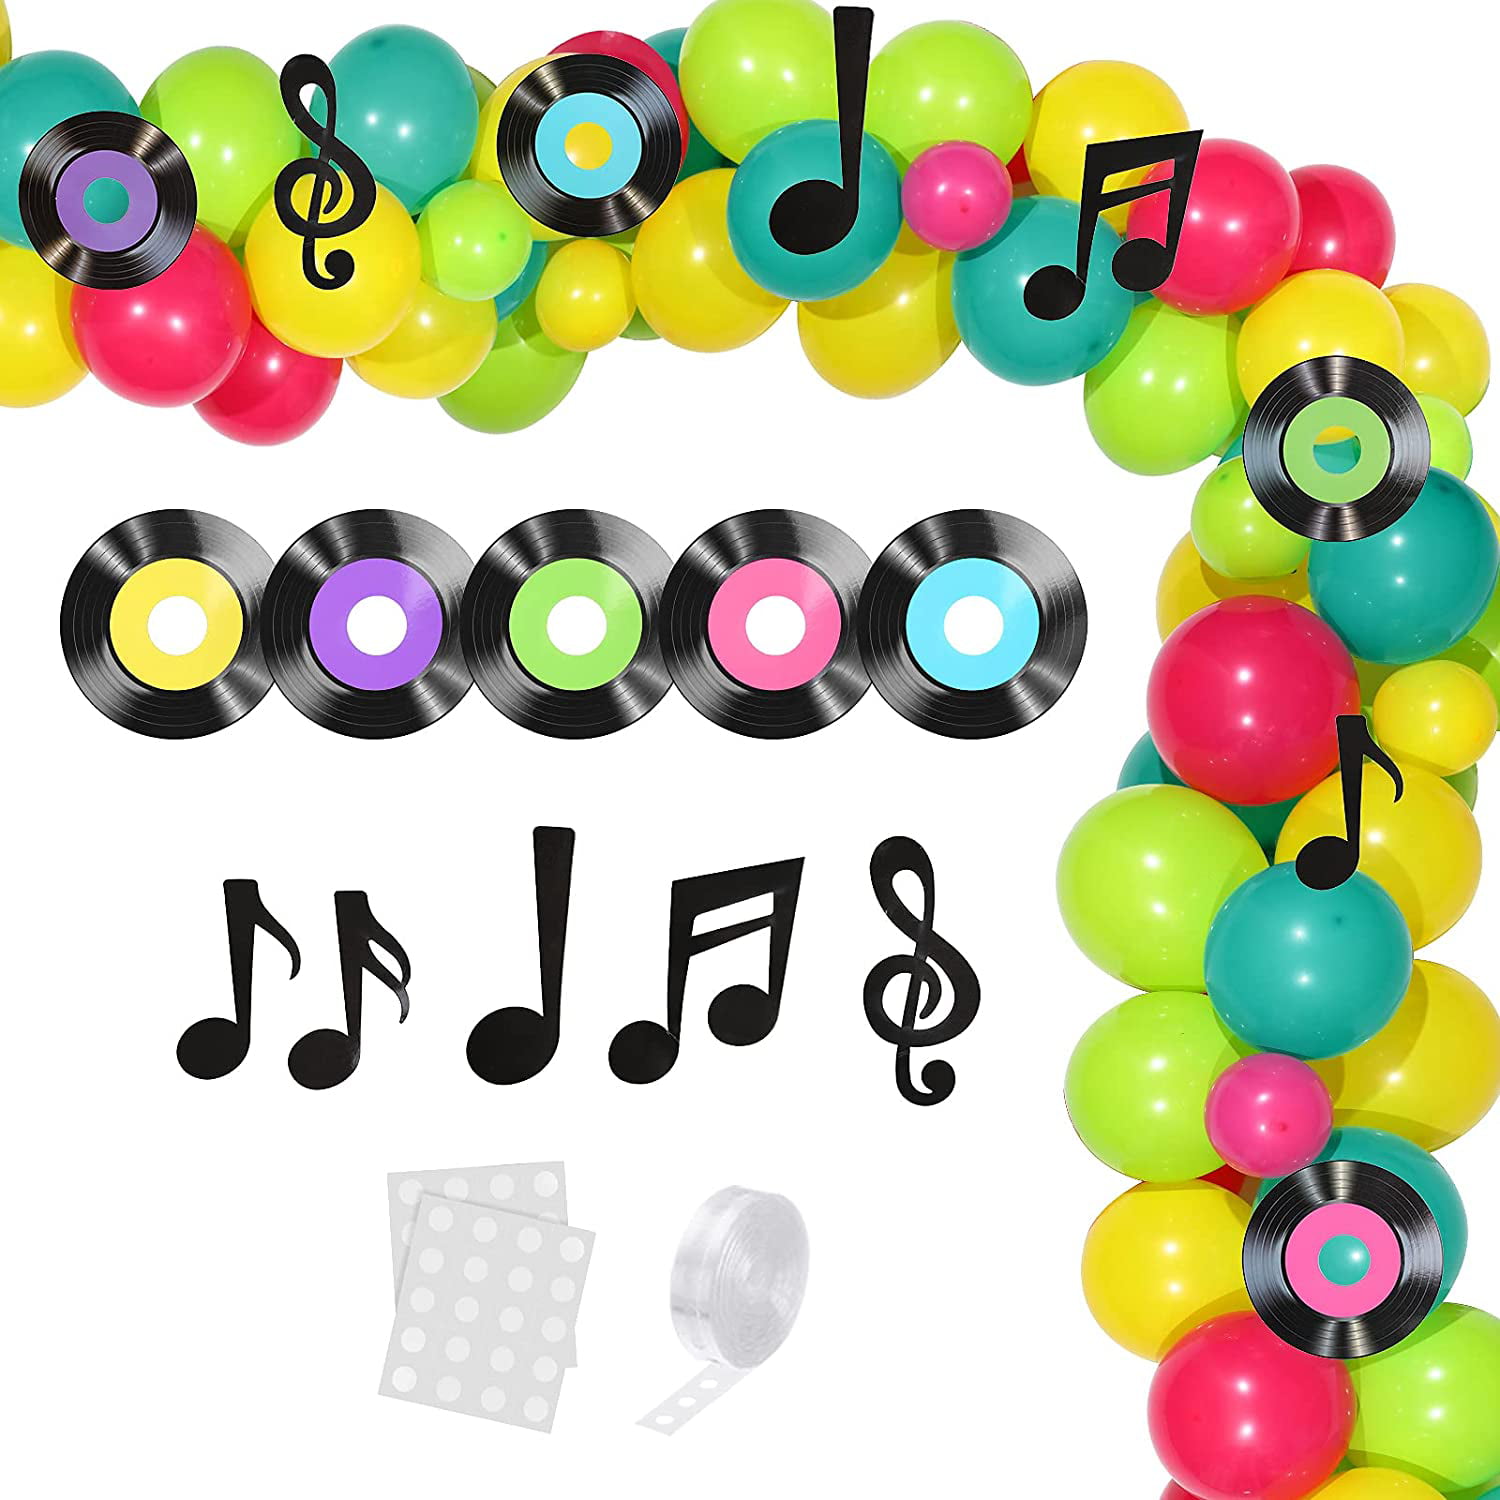 8 Styles 40 Pieces Records Cutouts Colorful Record Decoration 1950s Party Decorations for Theme Party Favors